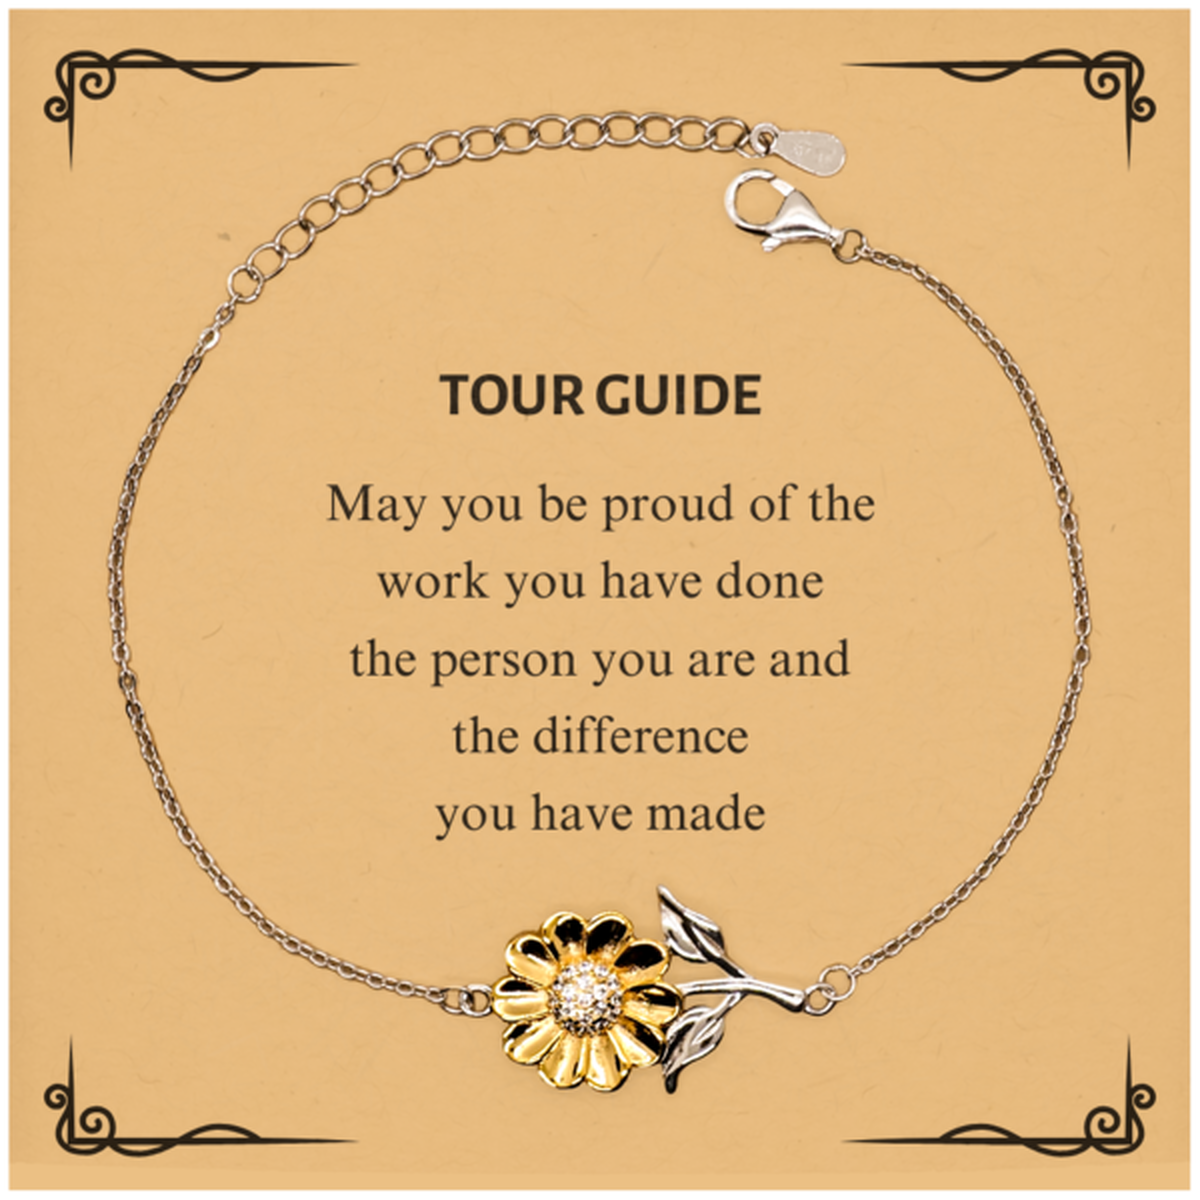 Tour Guide May you be proud of the work you have done, Retirement Tour Guide Sunflower Bracelet for Colleague Appreciation Gifts Amazing for Tour Guide